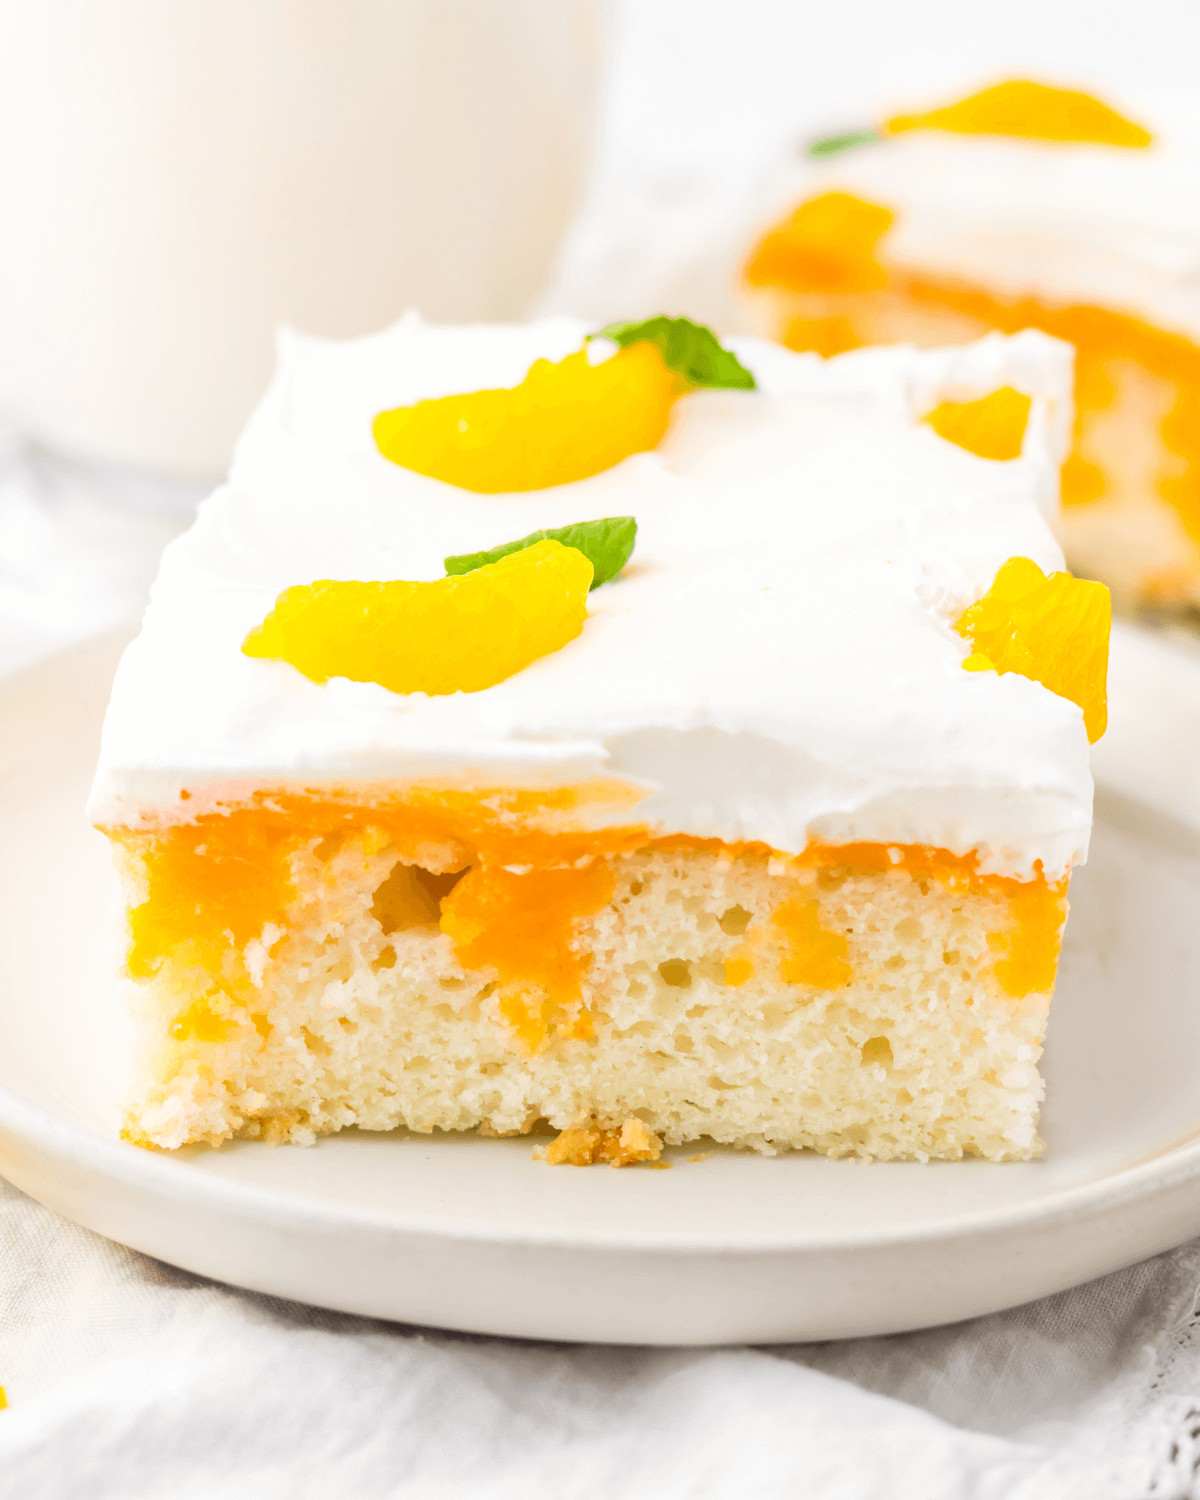 A slice of orange creamsicle cake with whipped cream topping and fruit garnish on a white plate.